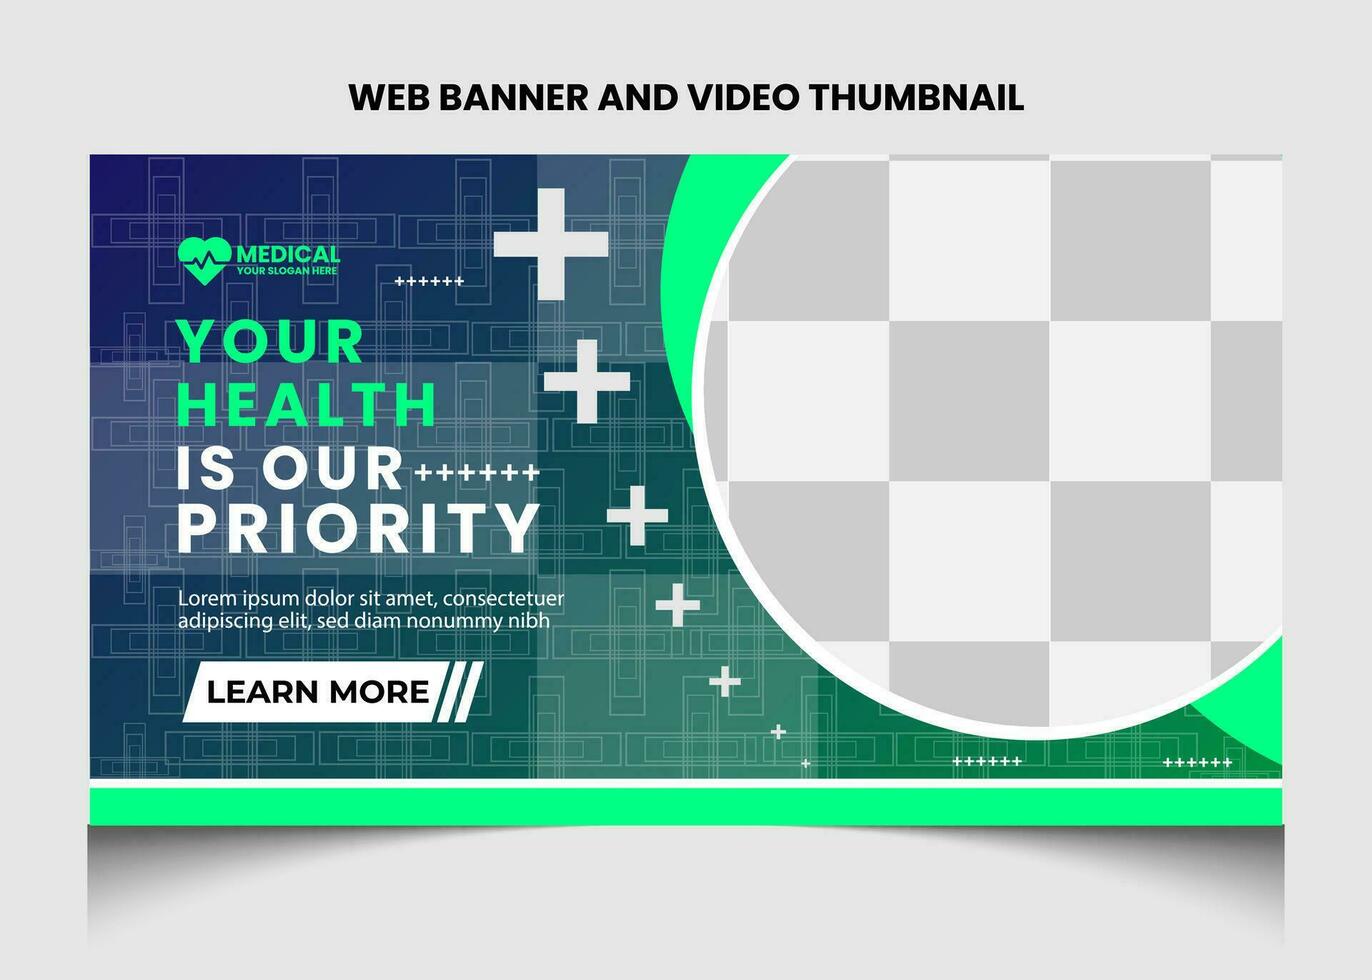 Healthcare or medical video thumbnail or web banner template design. vector